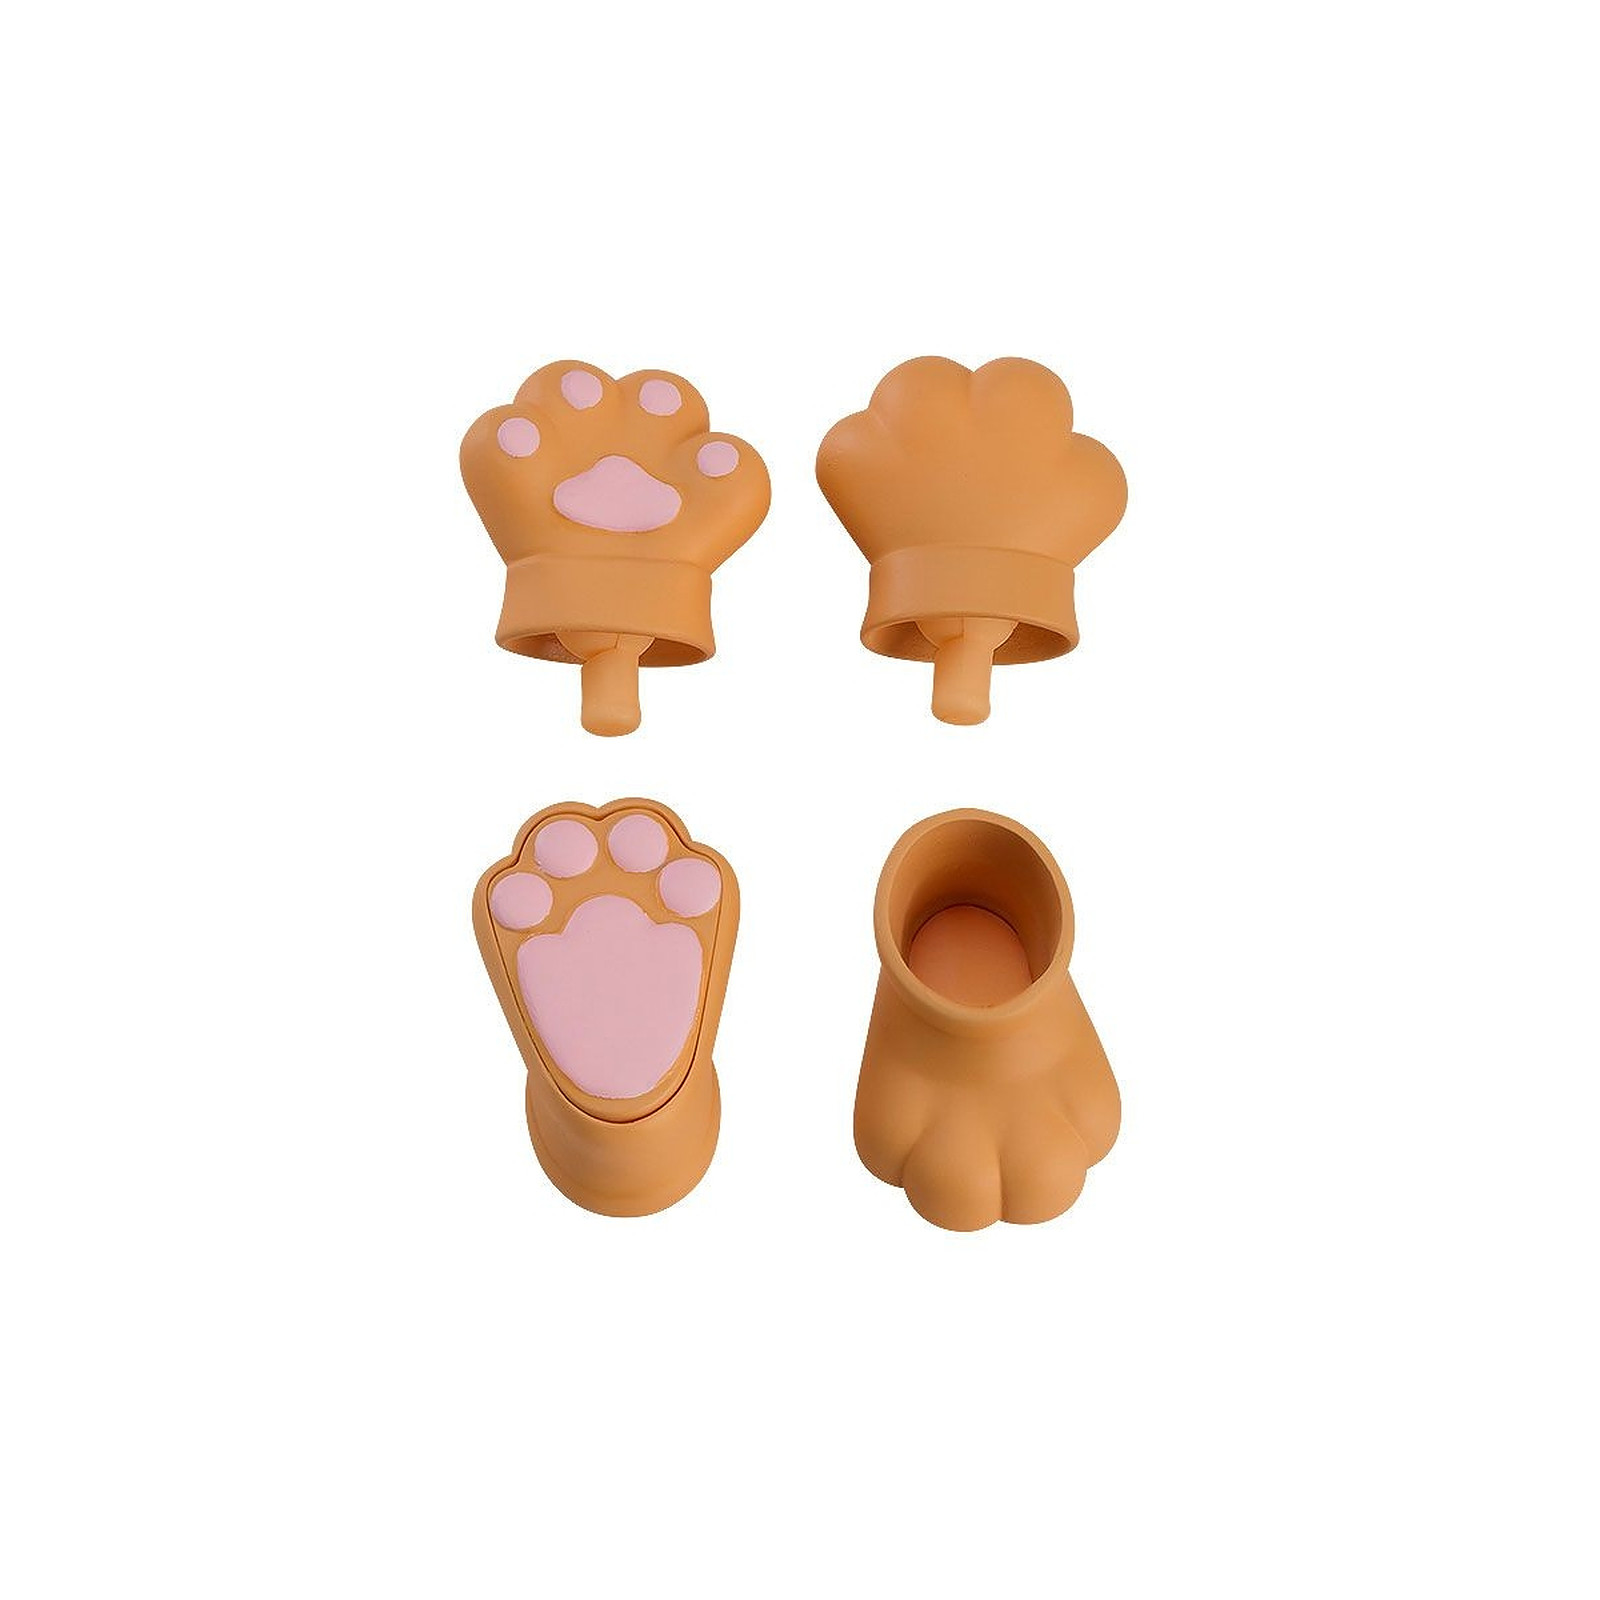 Original Character - Accessoires pour figurines Nendoroid Doll Animal Hand Parts Set (Brown) - Figurines Good Smile Company